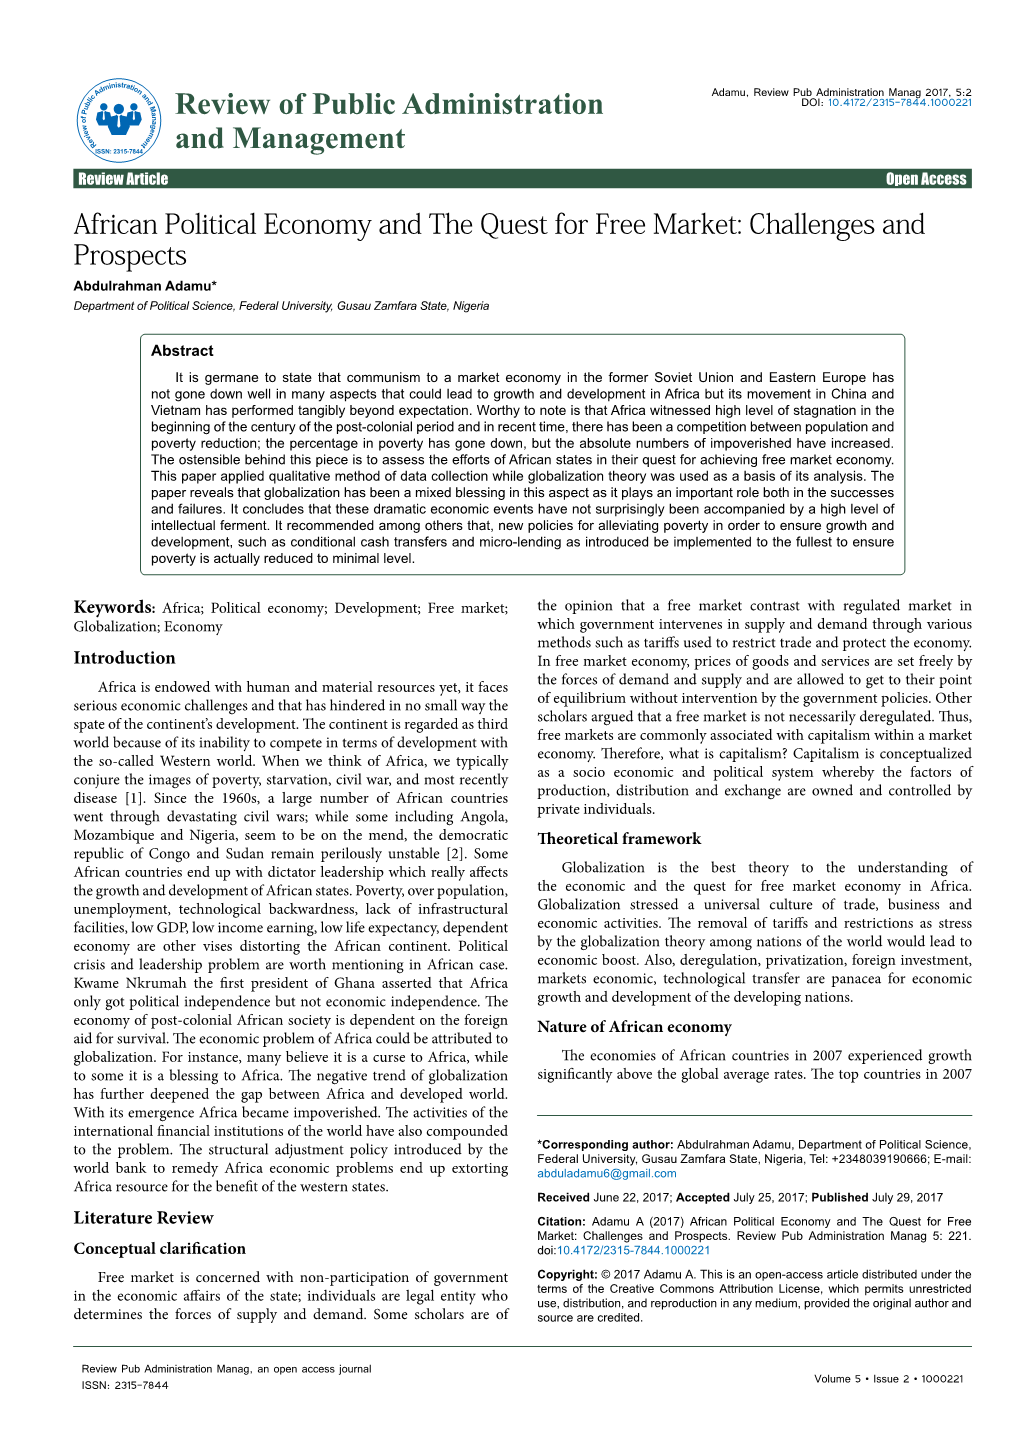 African Political Economy and the Quest for Free Market: Challenges and Prospects